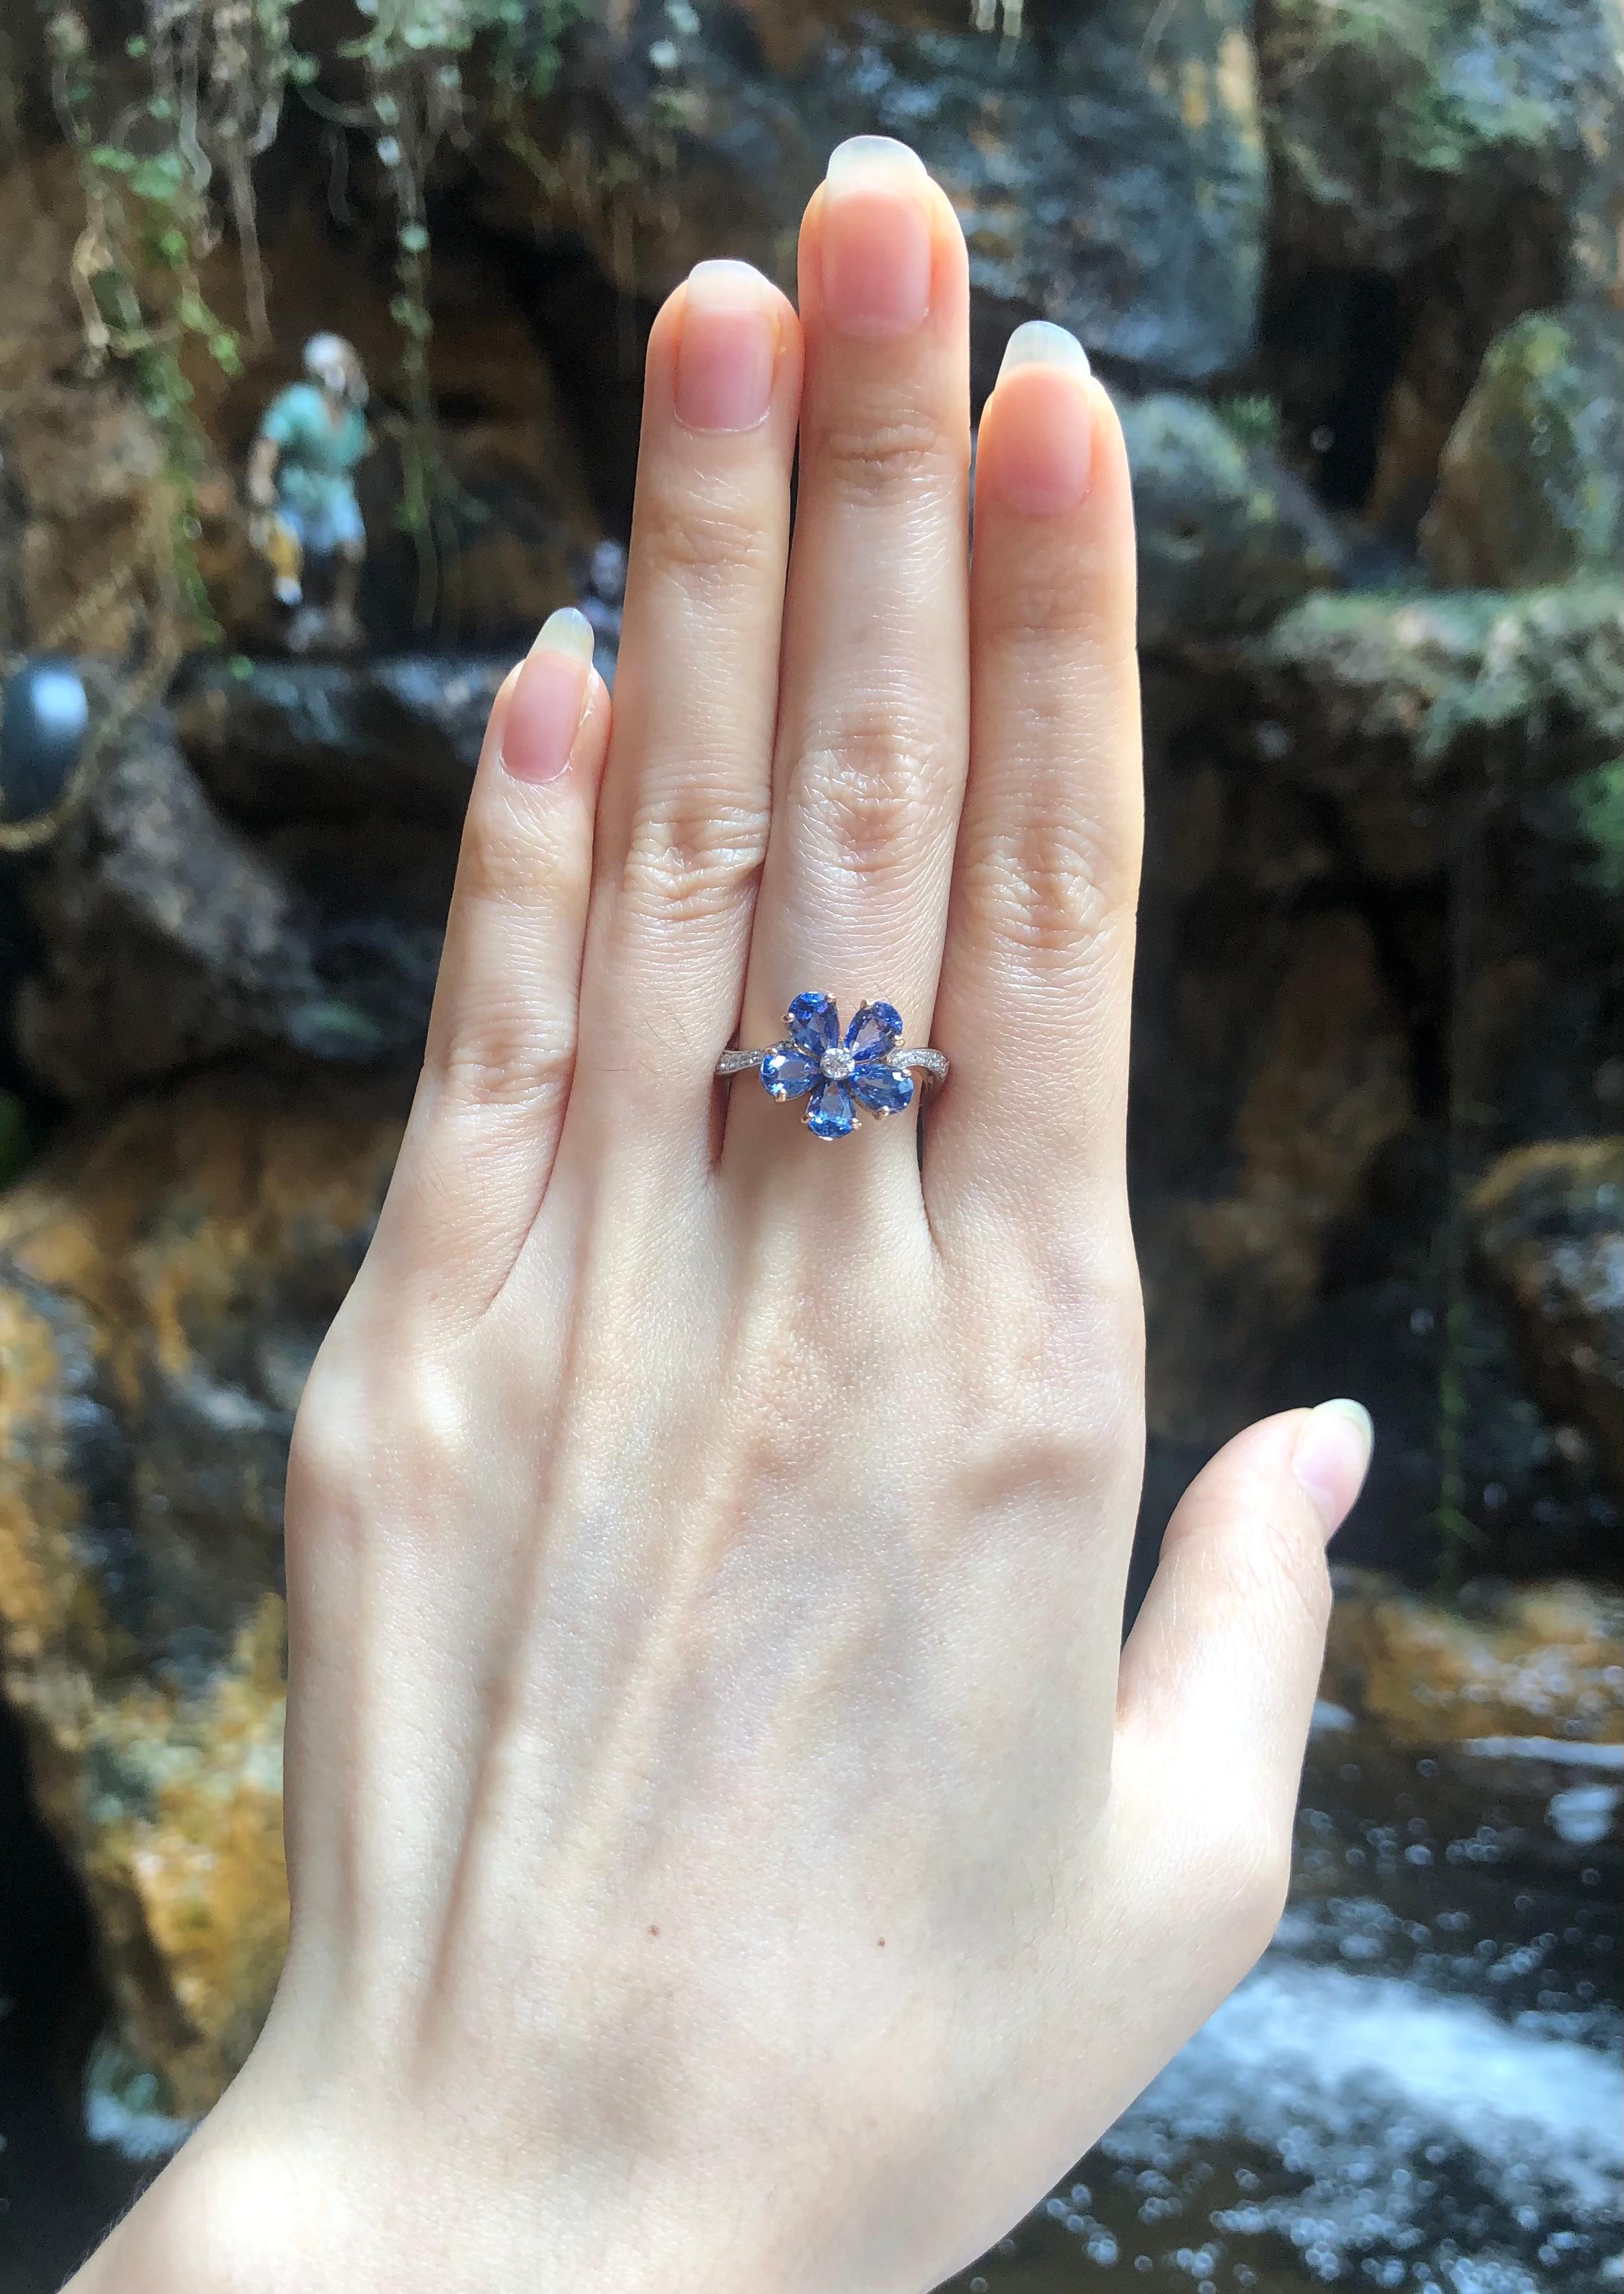 Blue Sapphire 2.63 carats with Diamond 0.14 carat Ring set in 18 Karat Rose Gold Settings

Width:  1.3 cm 
Length: 1.2 cm
Ring Size: 52
Total Weight: 5.16 grams

